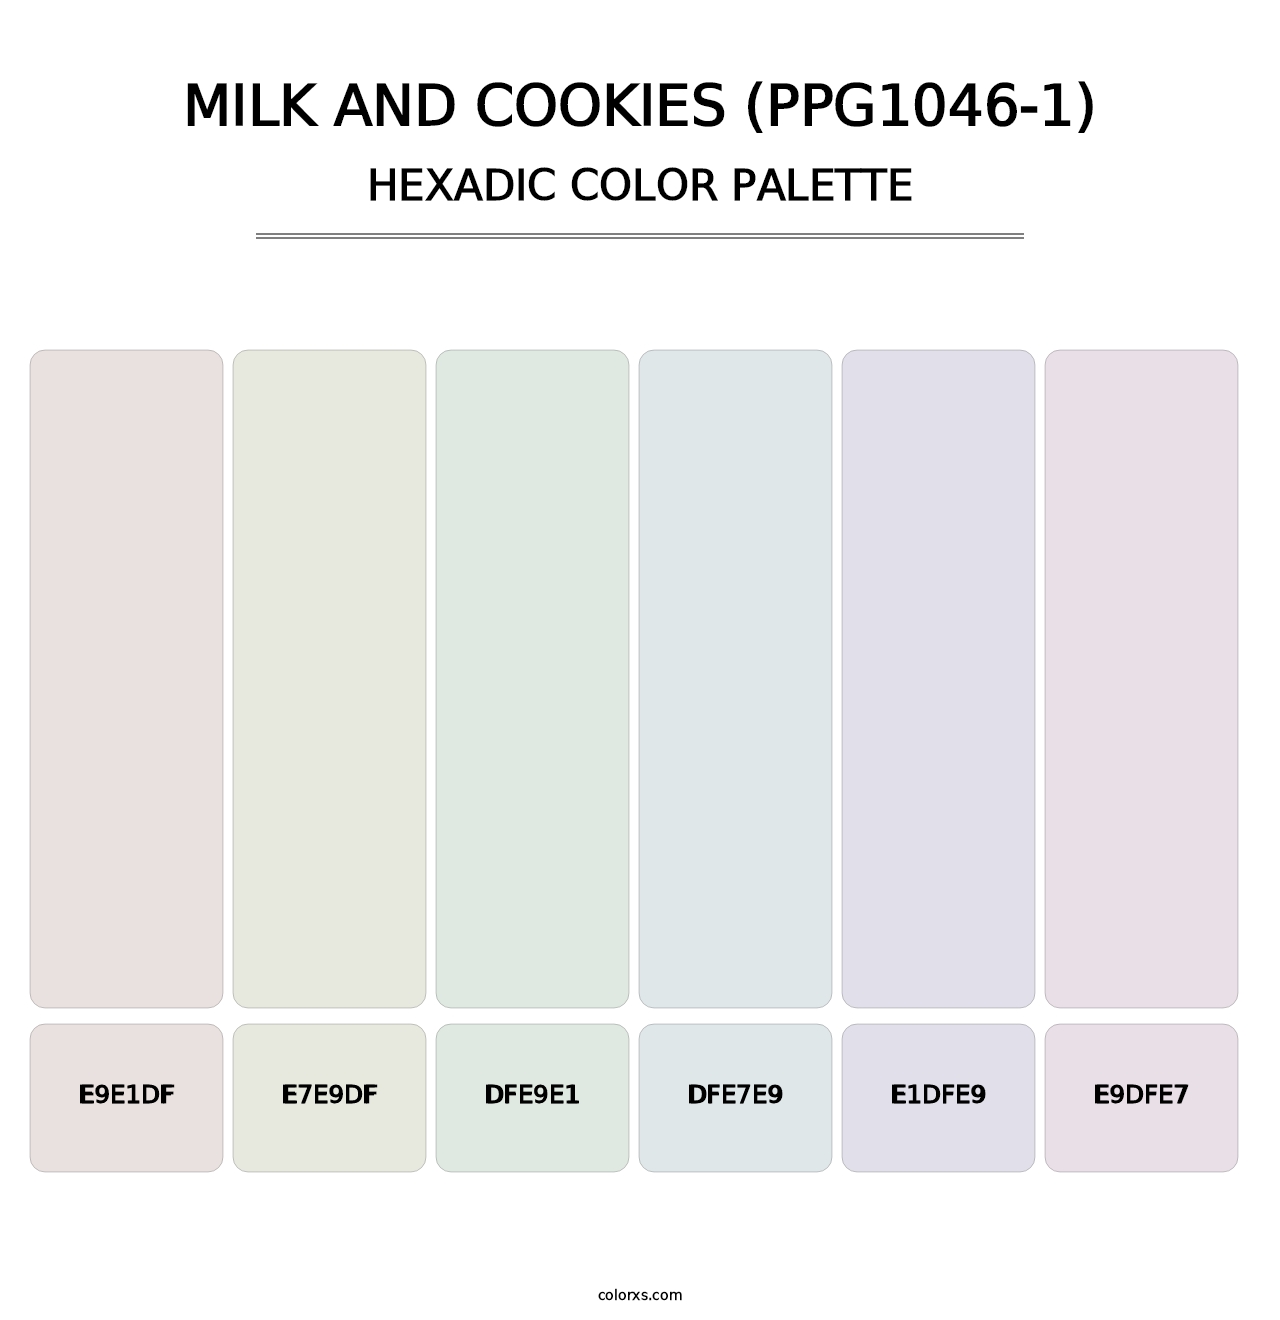 Milk And Cookies (PPG1046-1) - Hexadic Color Palette